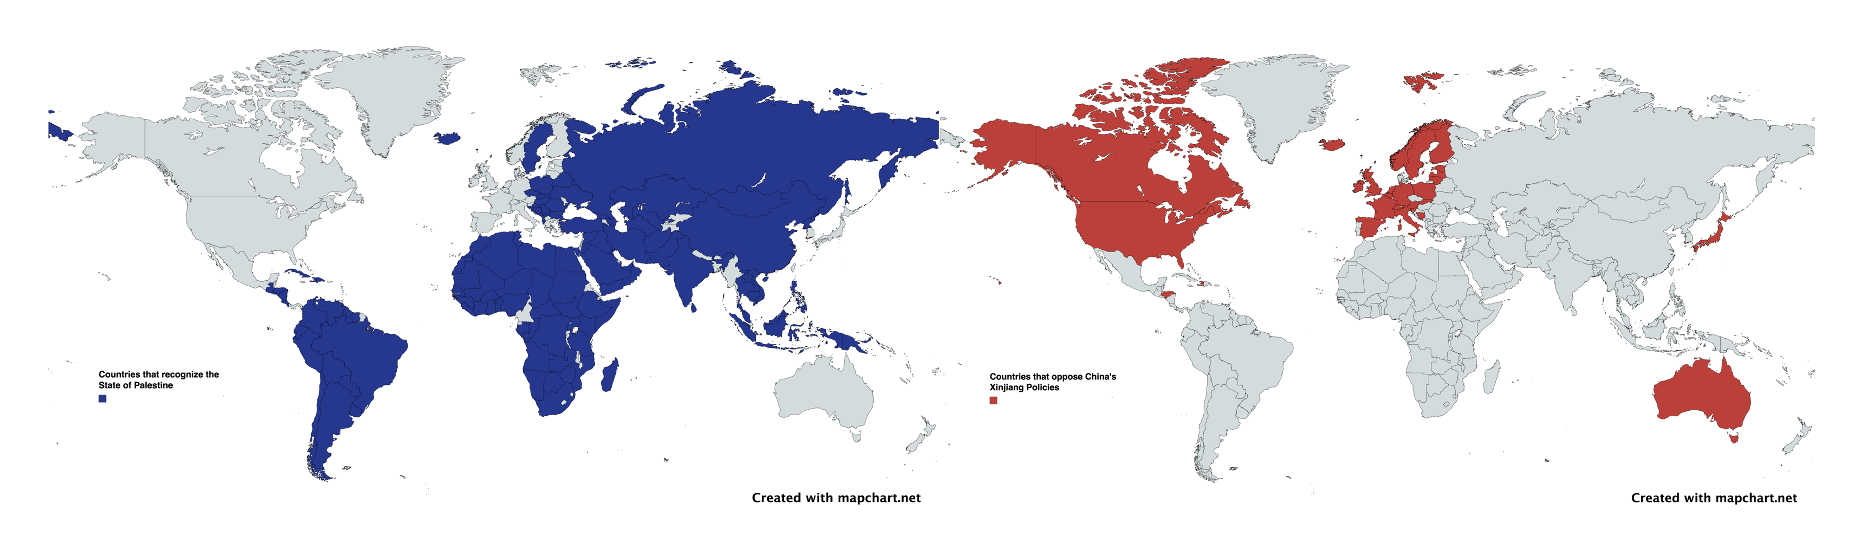 highlights in blue the states that recognize the State of Palestine and the other (right) indicates states opposing Chinese oppression of the Uyghur population in Xinjiang in red.